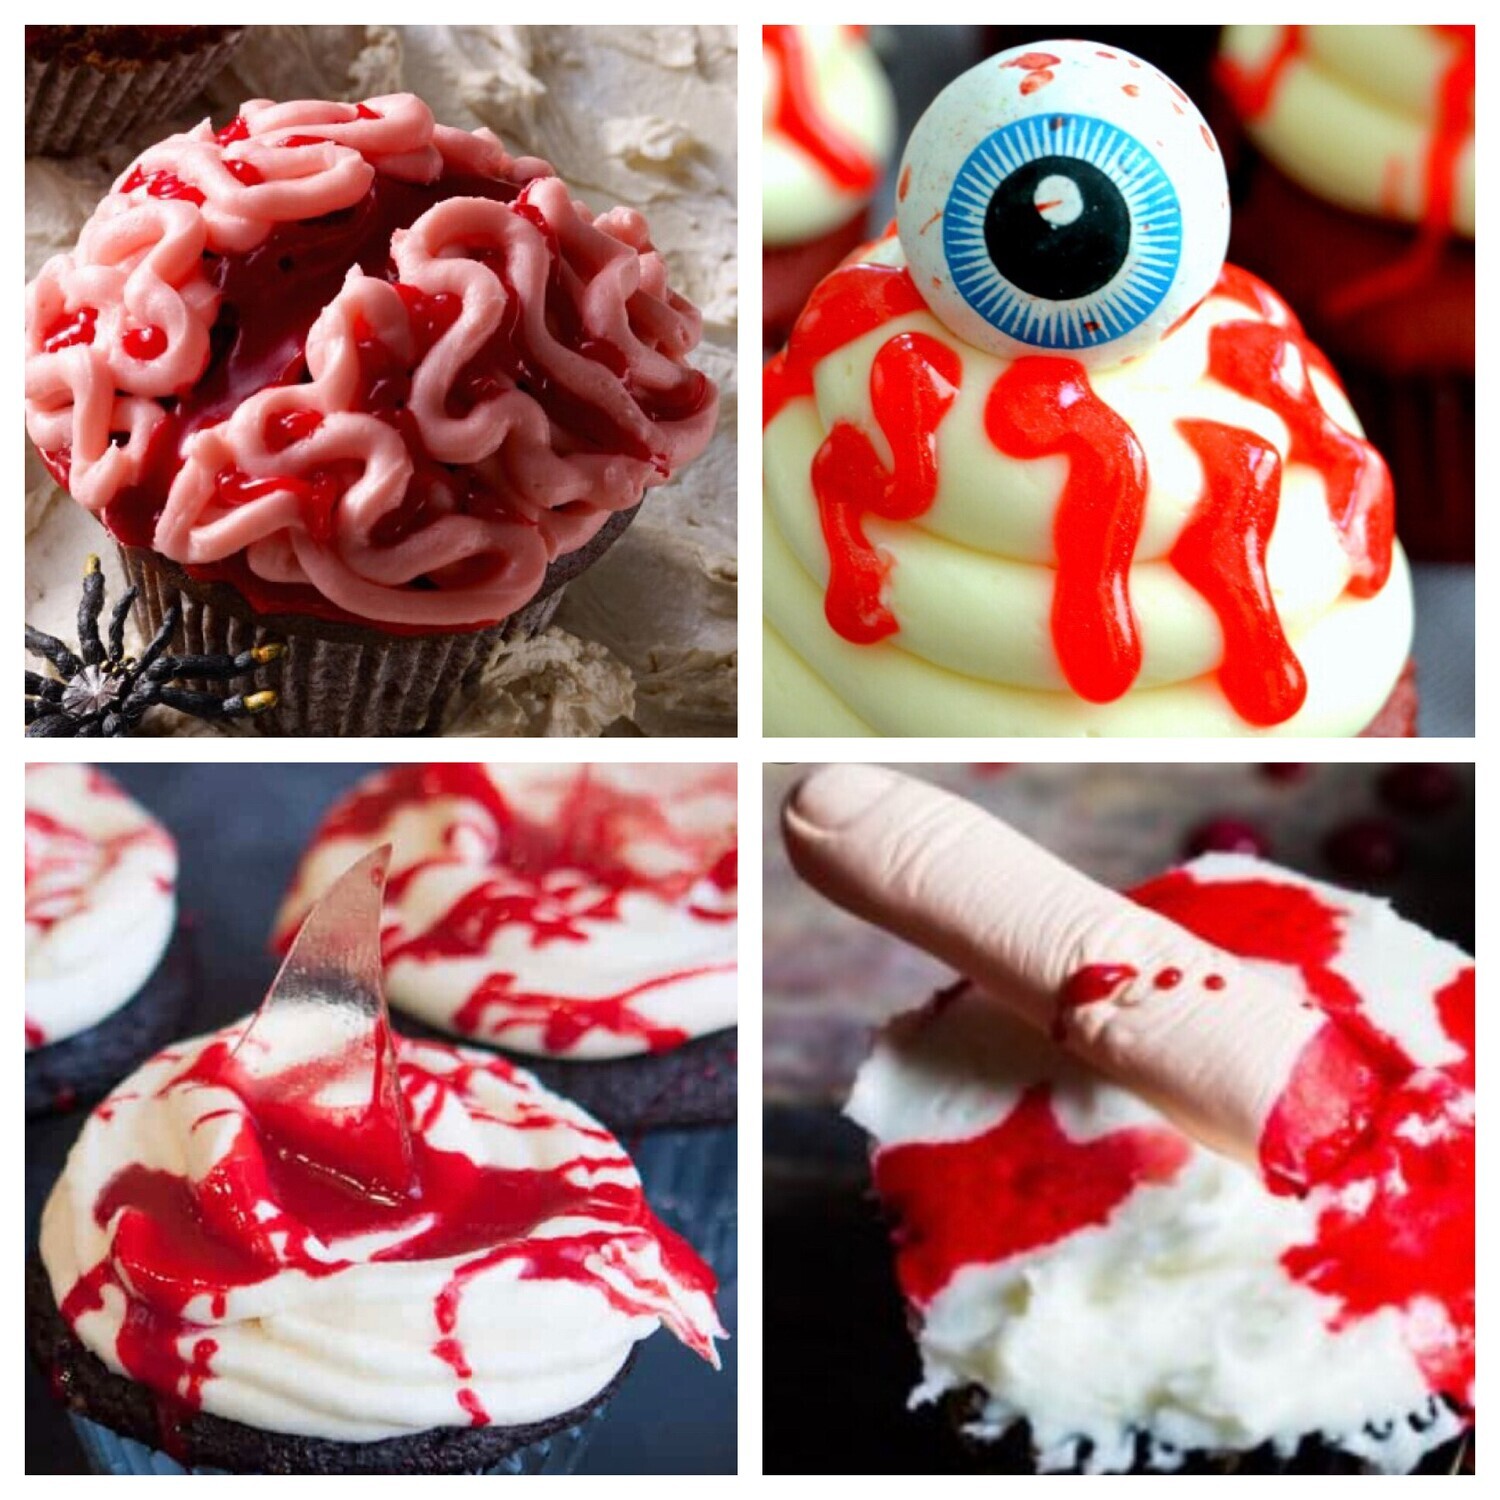 Blood & Brains Halloween Cupcake Class - Friday, October 28th from 6pm to 8pm